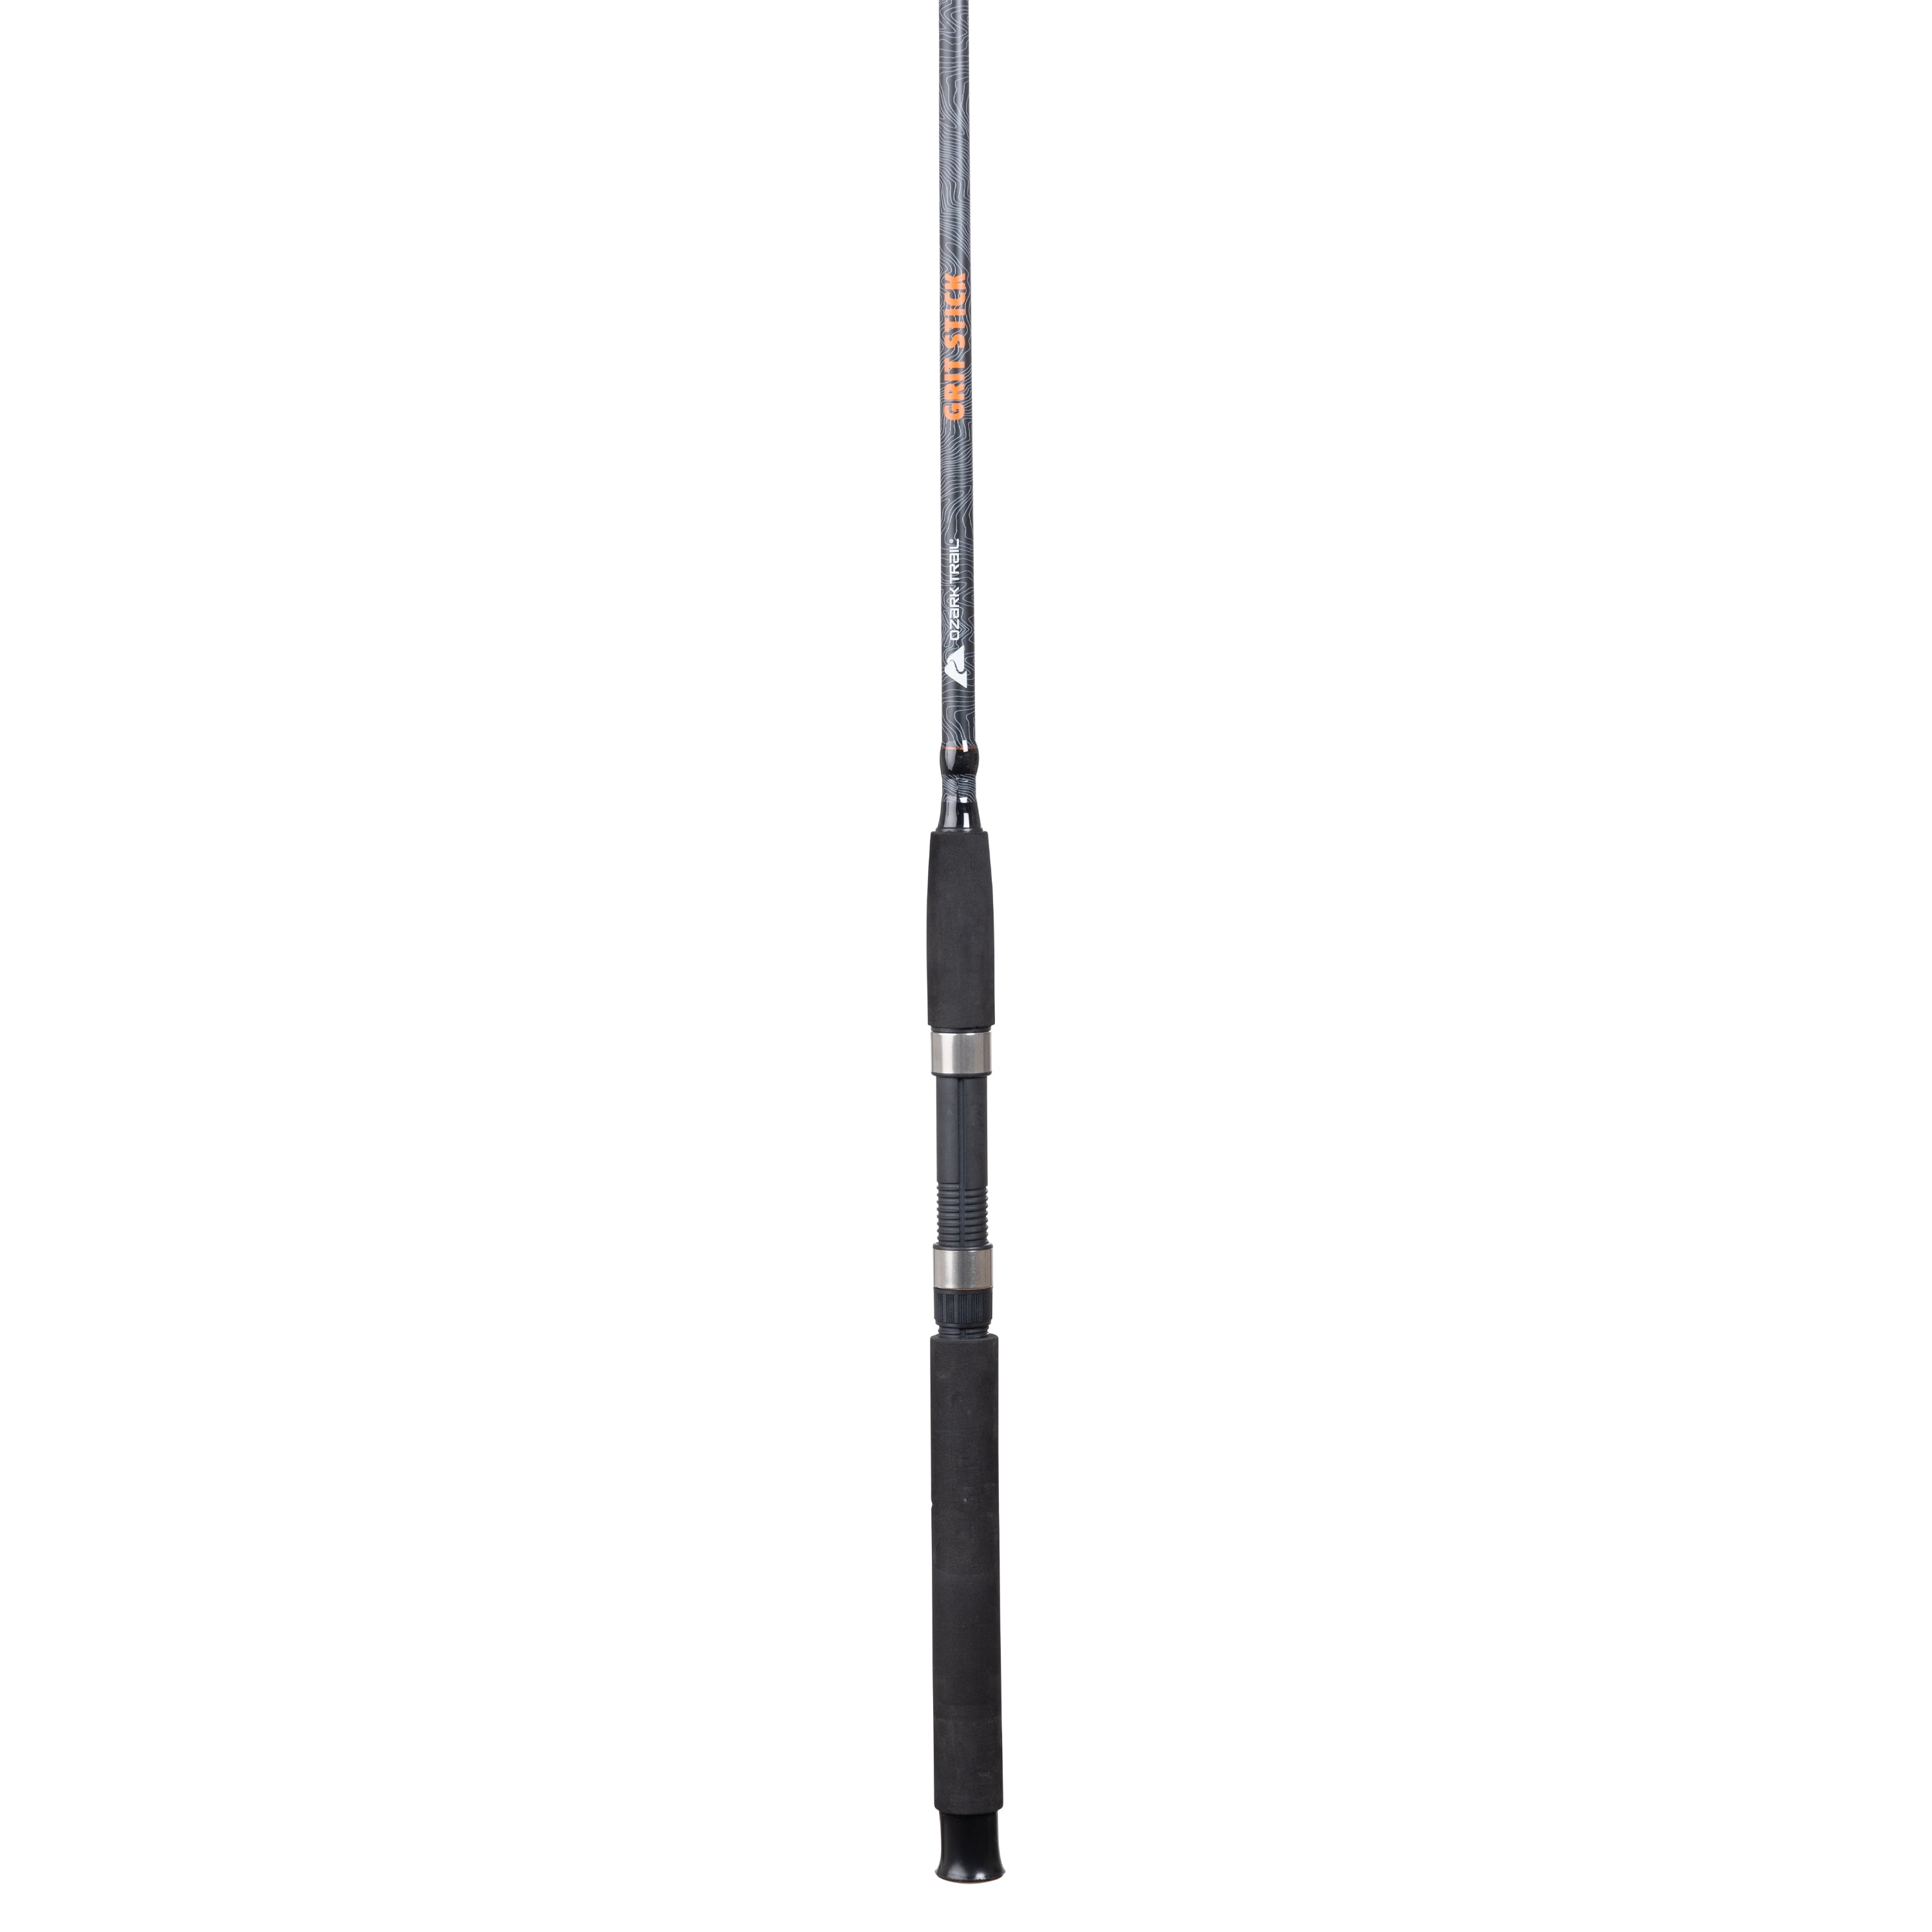 Ozark Trail Grit Stick Spinning Fishing Rod, Heavy Action, 7ft